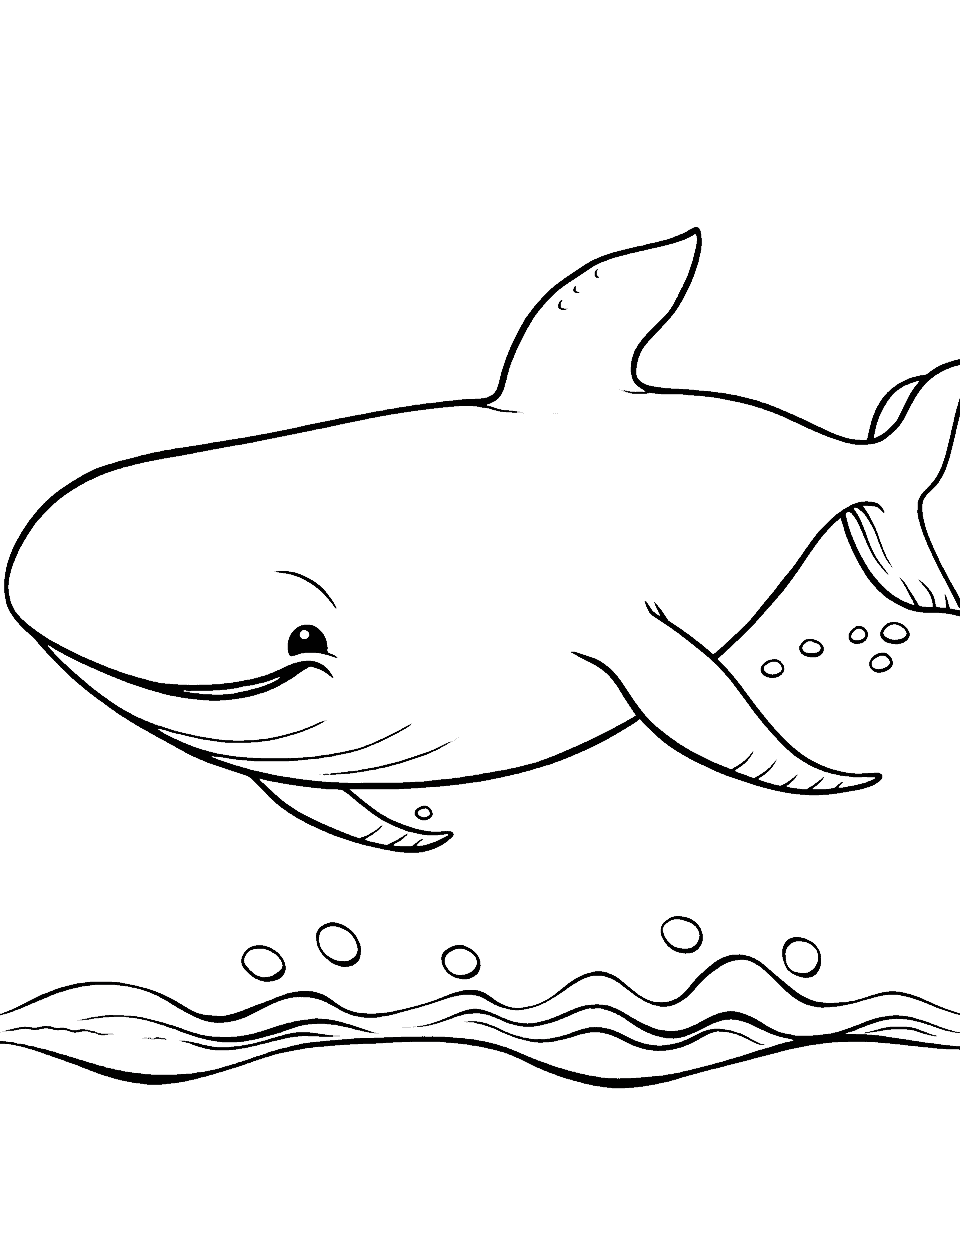 Smiling Whale Animal Coloring Page - A friendly whale with a big smile swimming in the ocean.